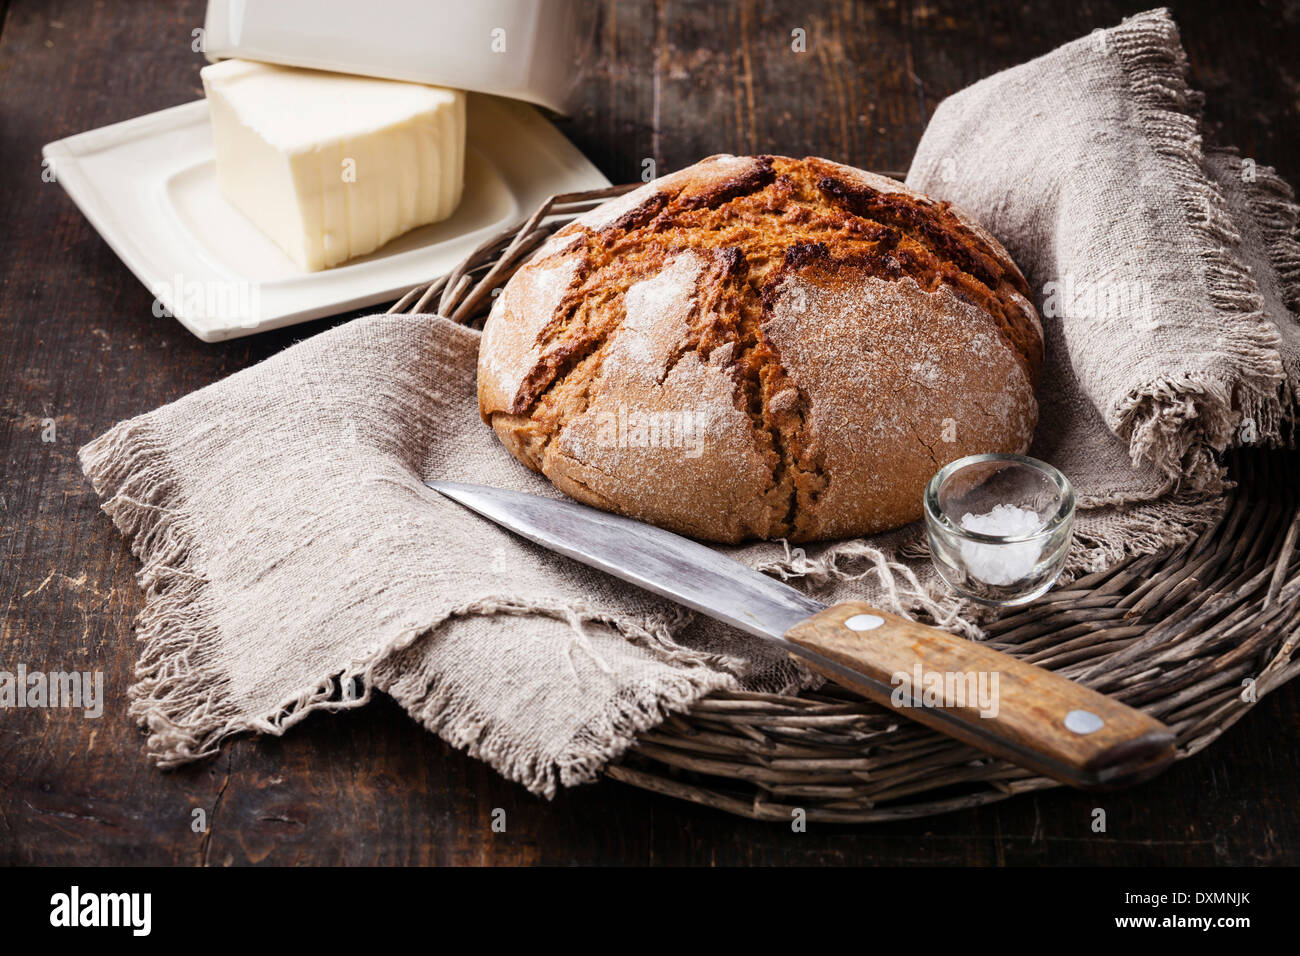 Rye bread and butter on wooden table Stock Photo